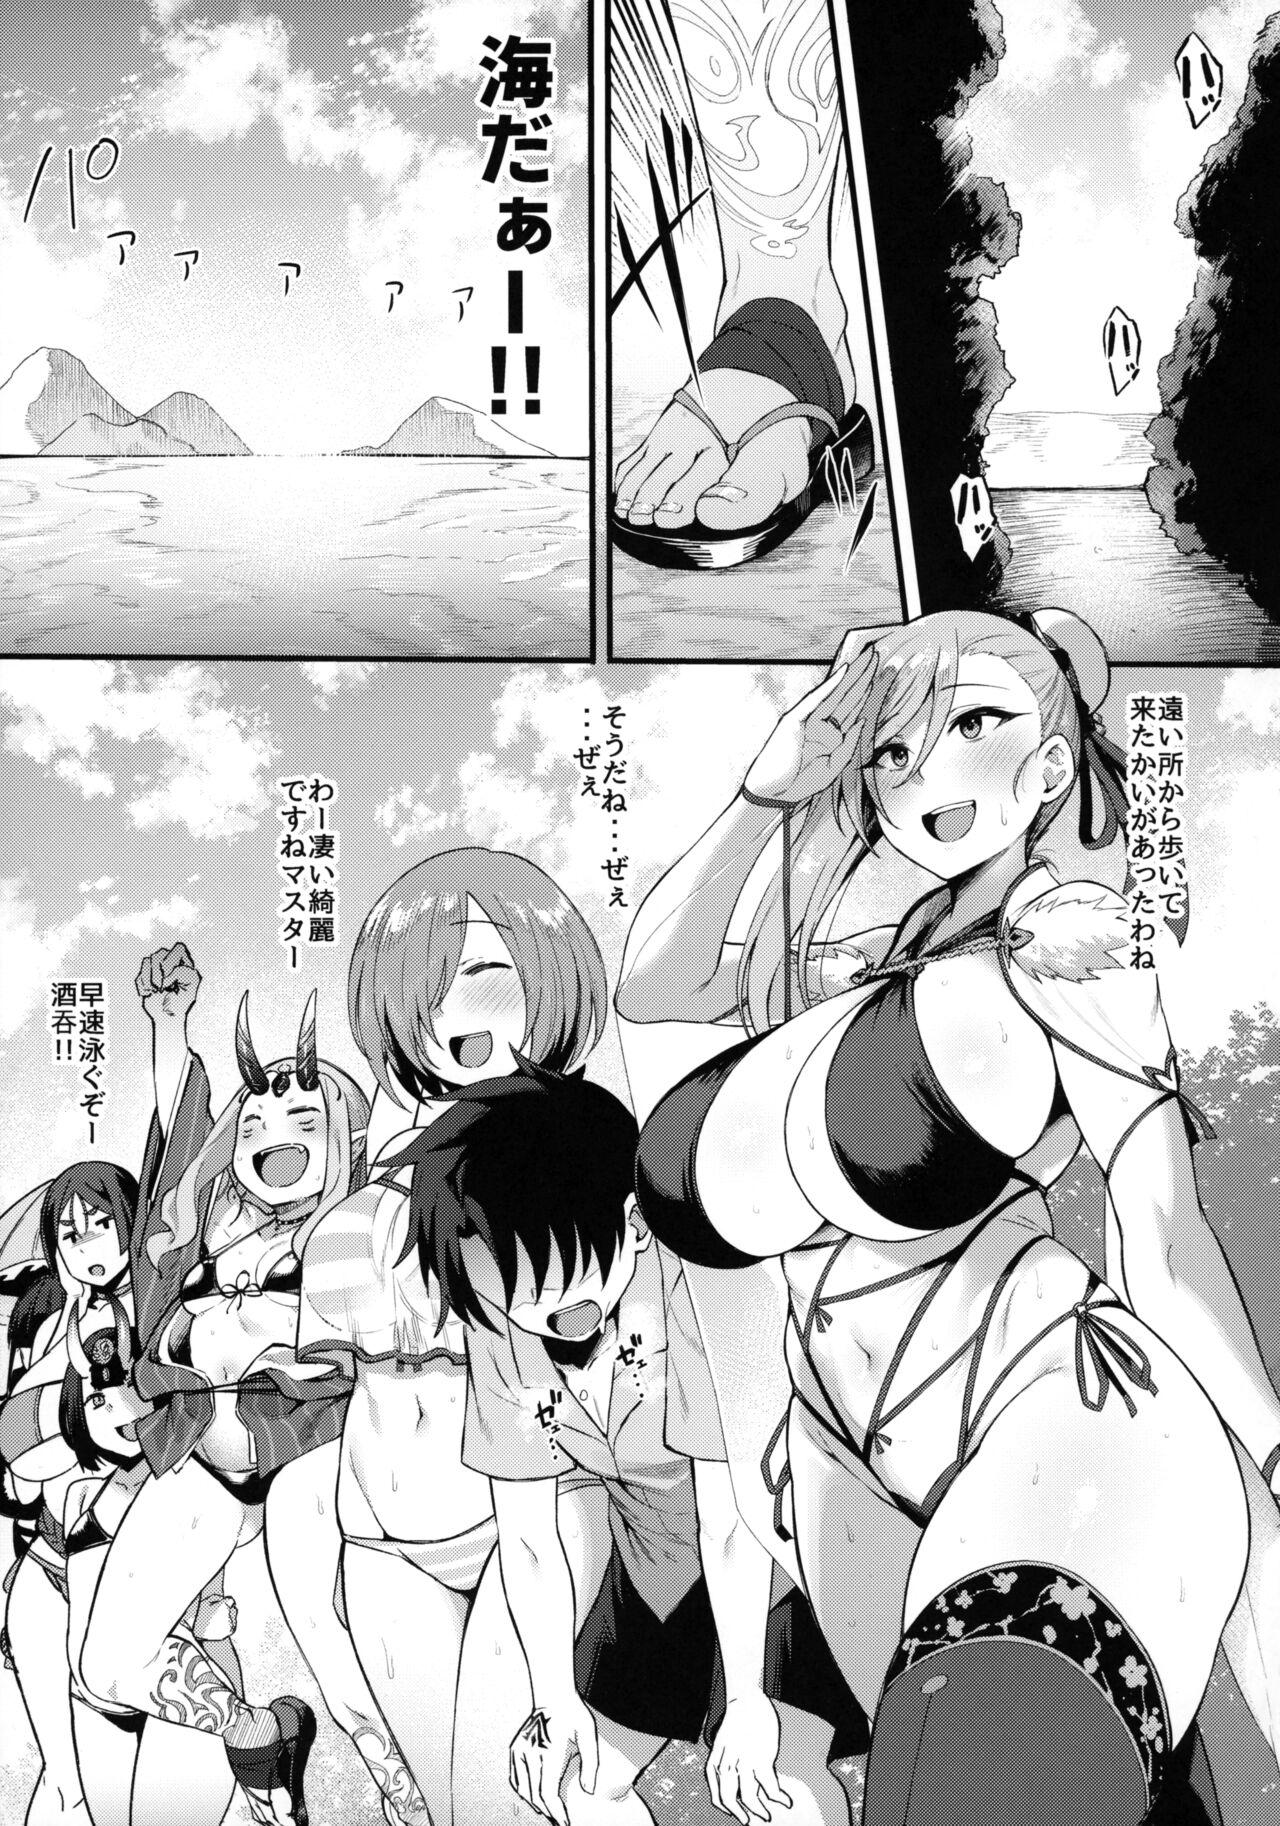 Best Blow Jobs Ever Musashi-chan to Himitsu no Nettaiya - Fate grand order Jerking Off - Page 2